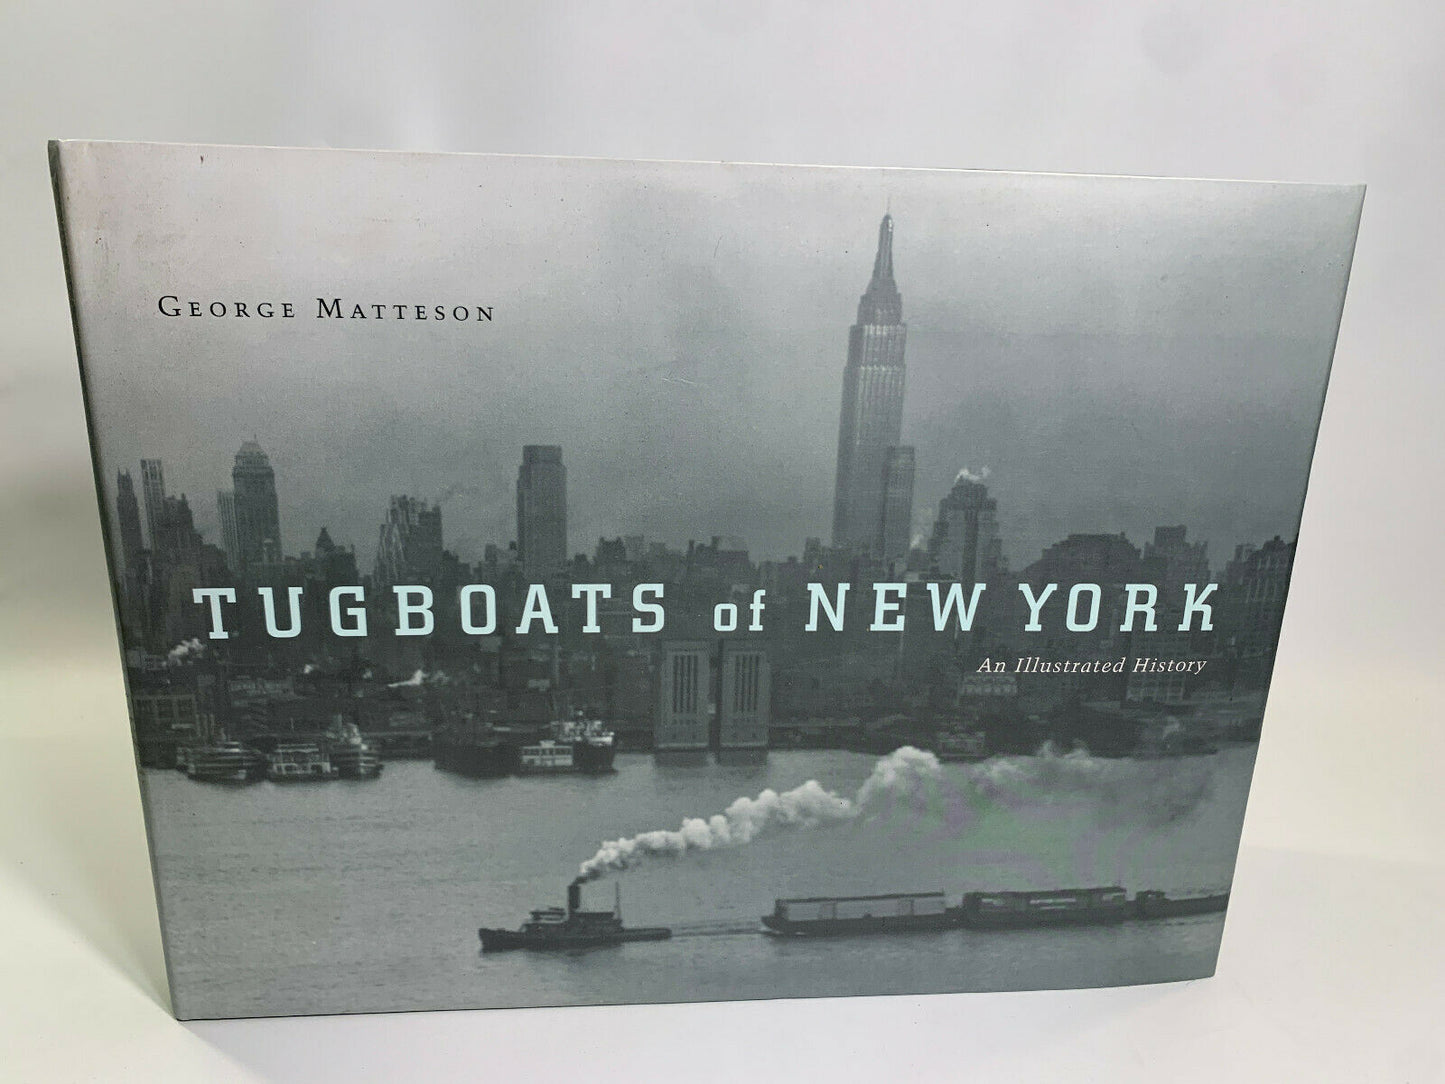 Tugboats of New York: An Illustrated History by George Matteson